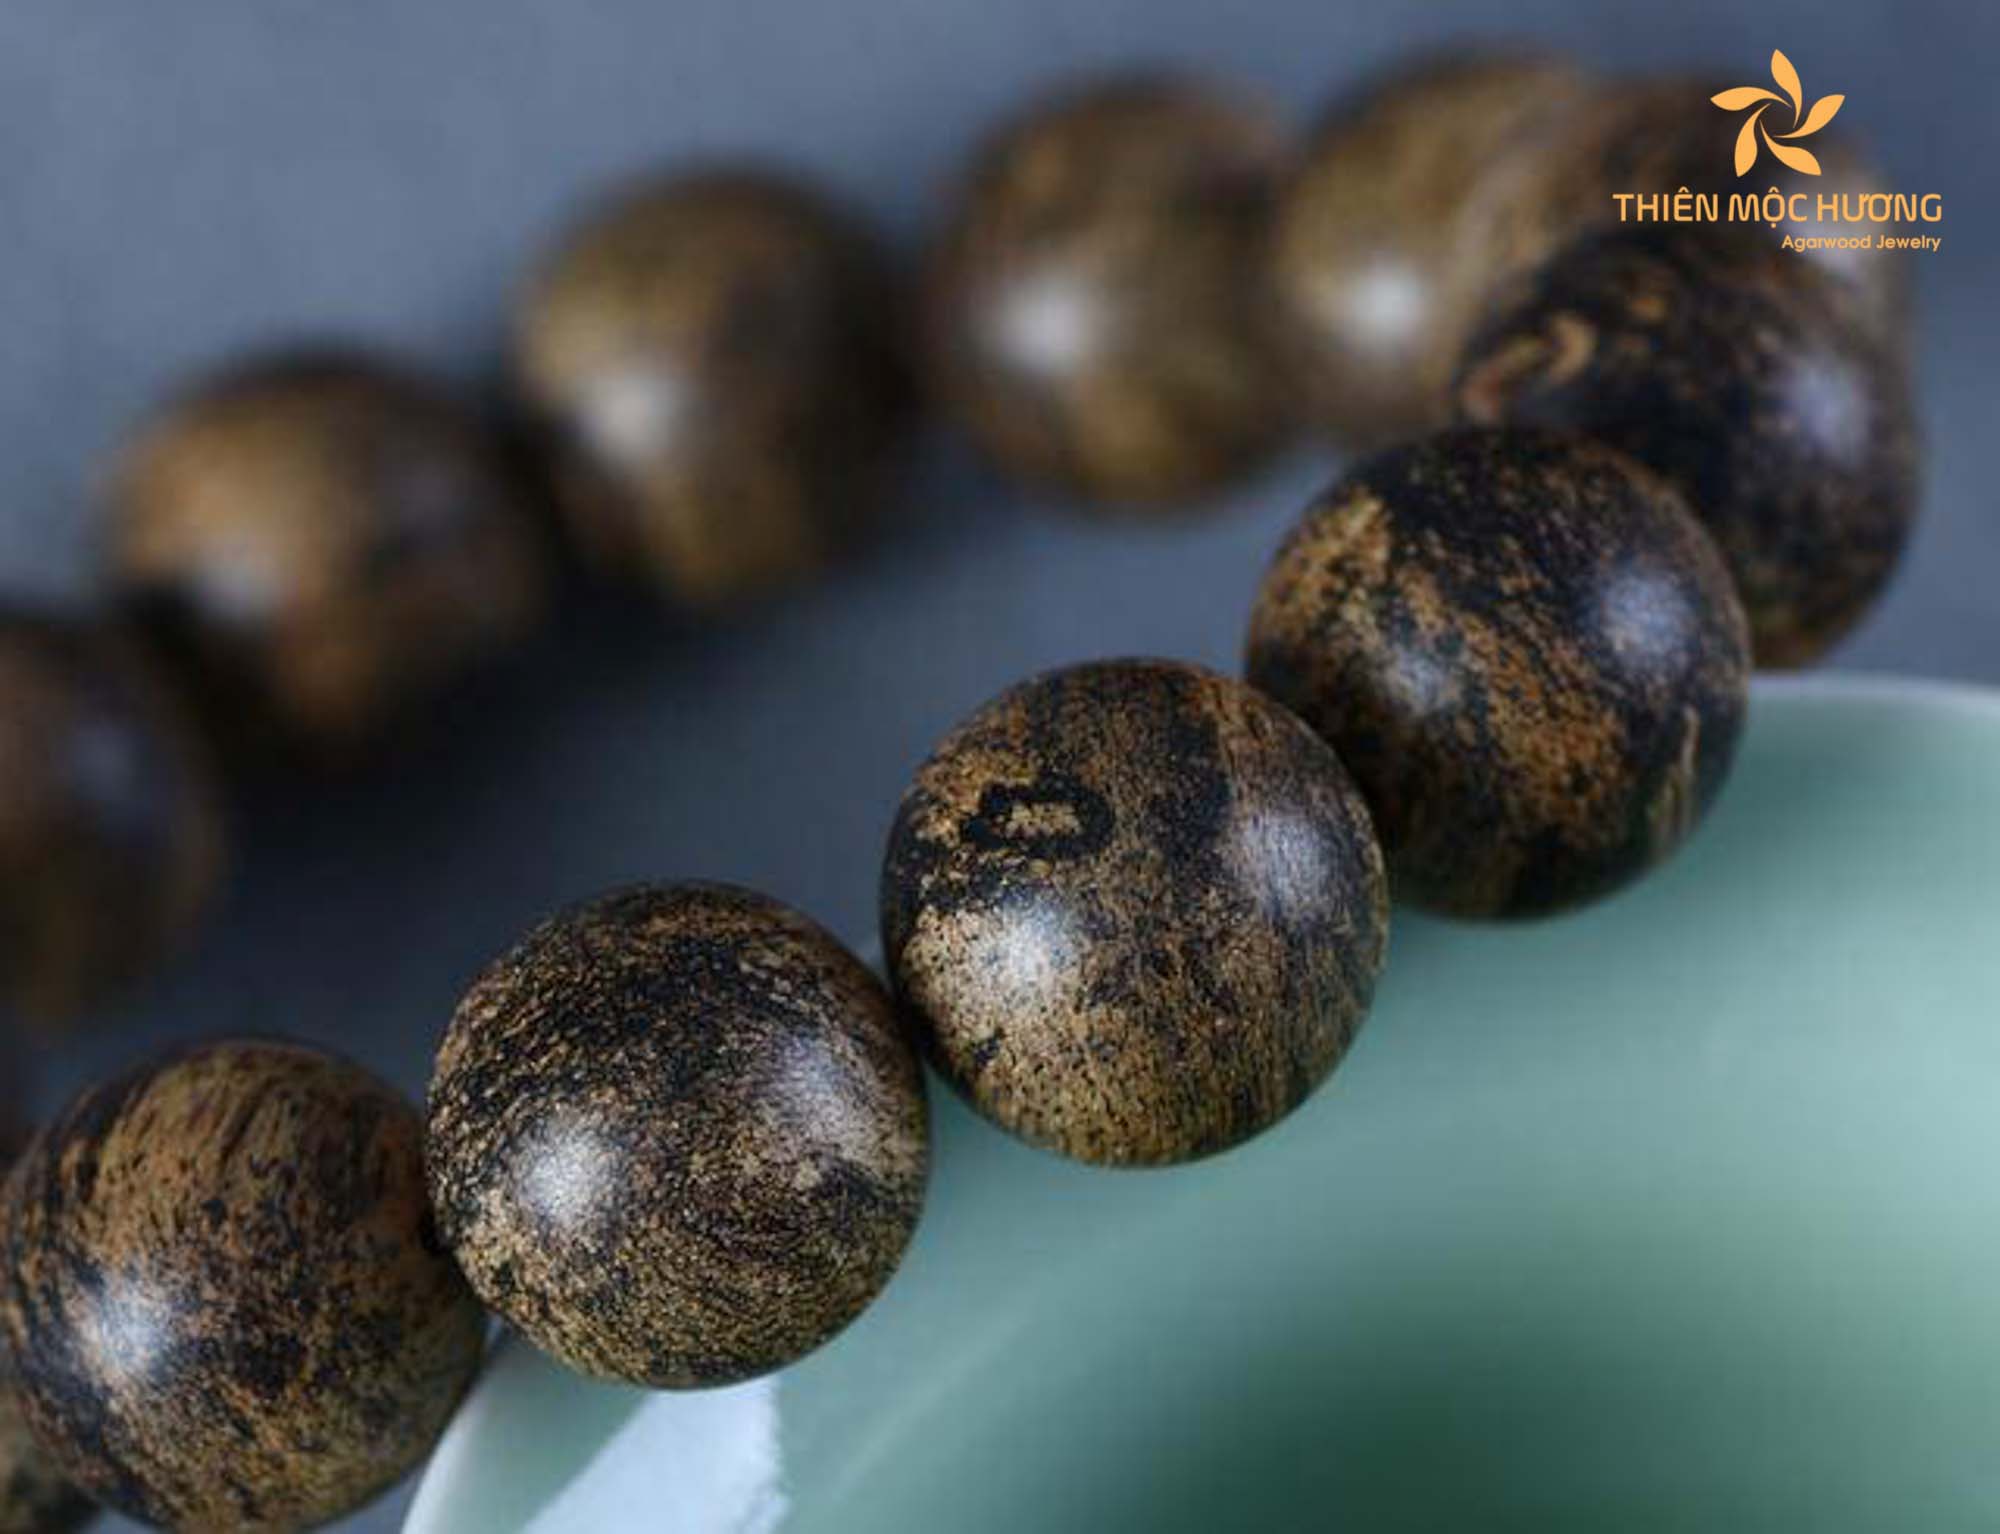 Agarwood can help to improve reproductive system health by having aphrodisiac, fertility-enhancing, and anti-impotence properties.